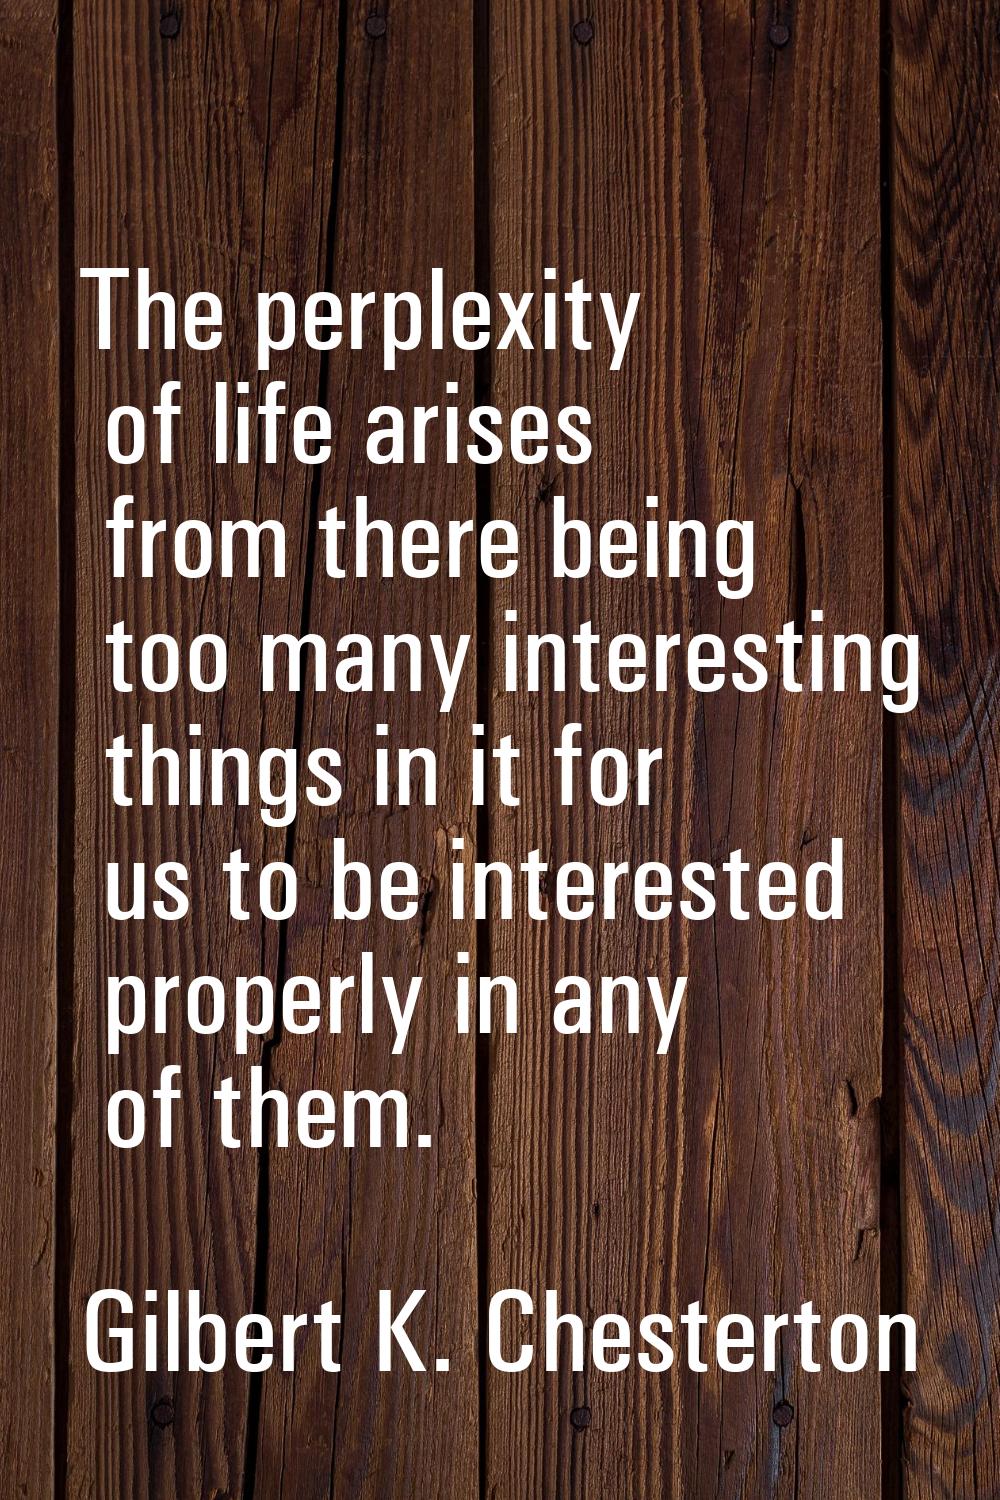 The perplexity of life arises from there being too many interesting things in it for us to be inter